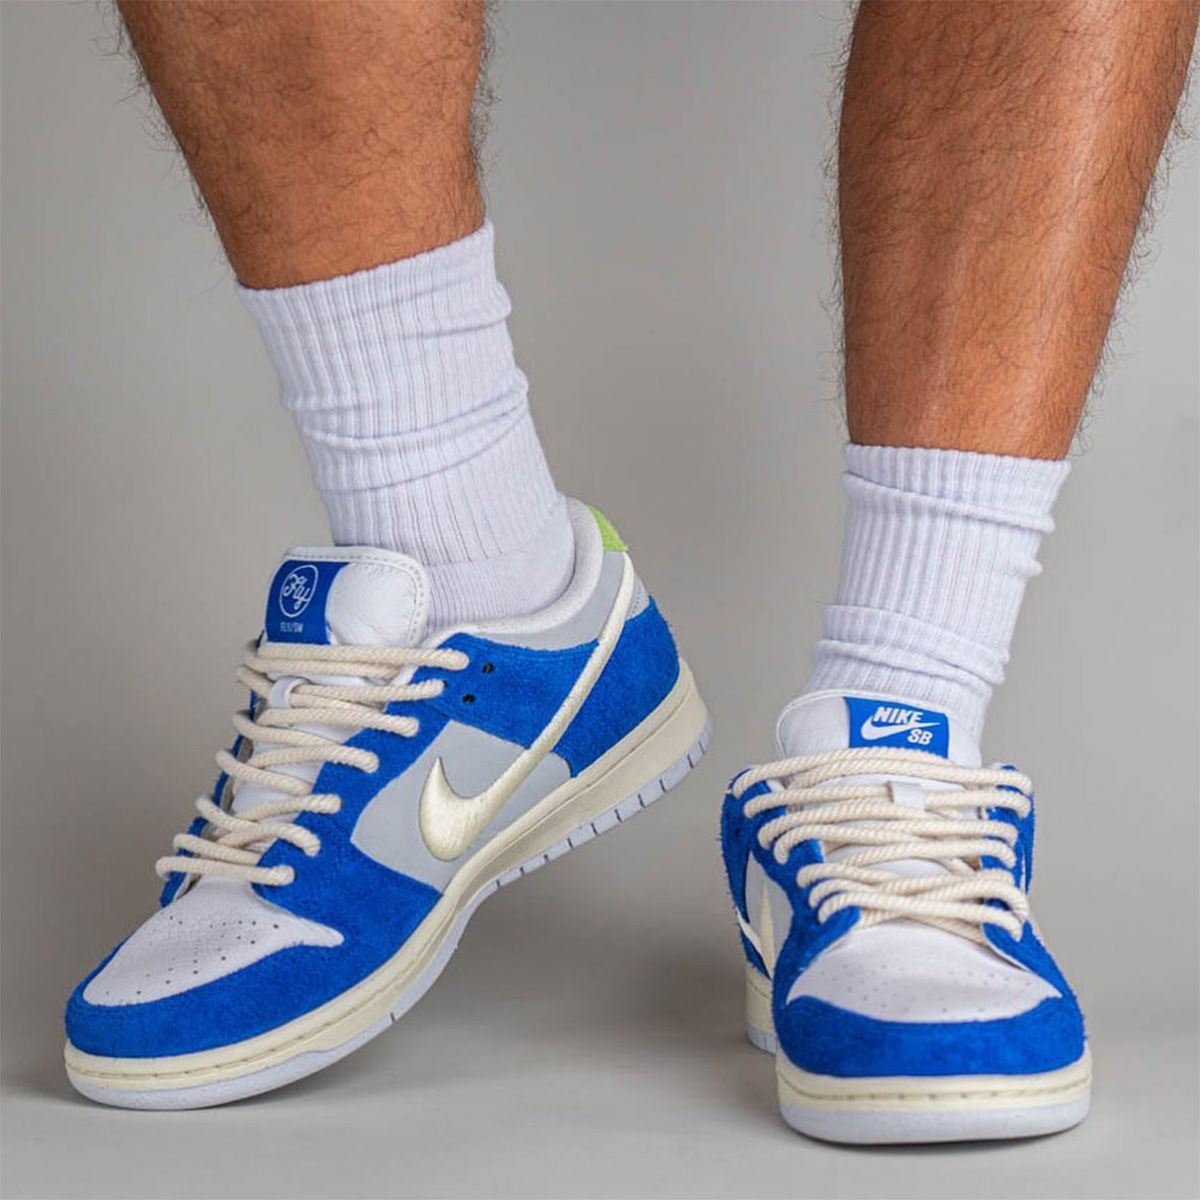 Where to Buy the Fly Streetwear x Nike SB Dunk Low | House of Heat°